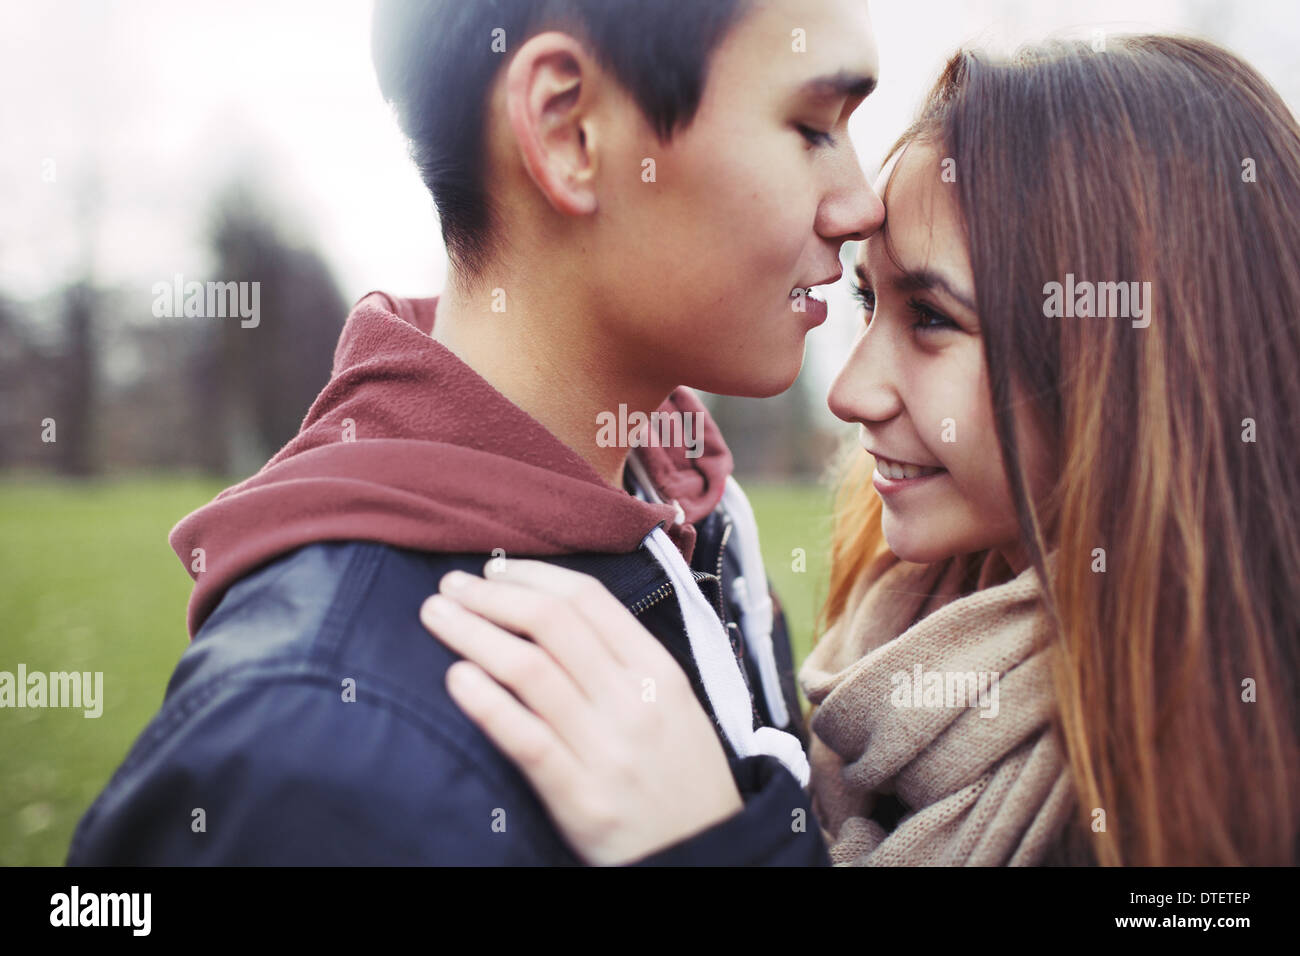 Close up image of cute young couple in love together in park. Asian teenage couple spending romantic time with each other. Stock Photo